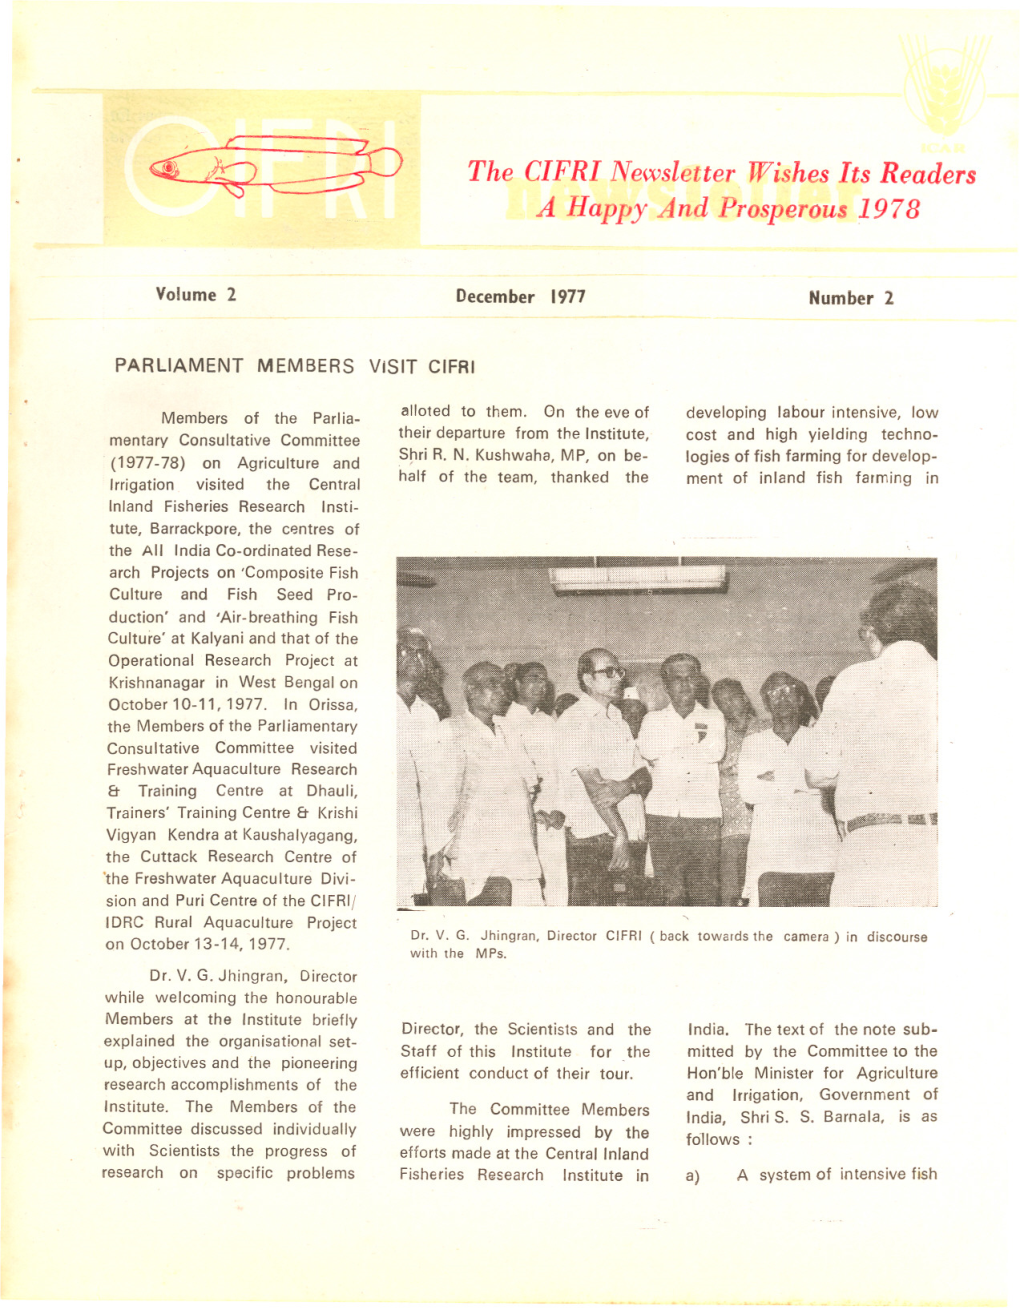 The CIFRI Newsletter Wishes Its Readers a Happy and Prosperous 1978